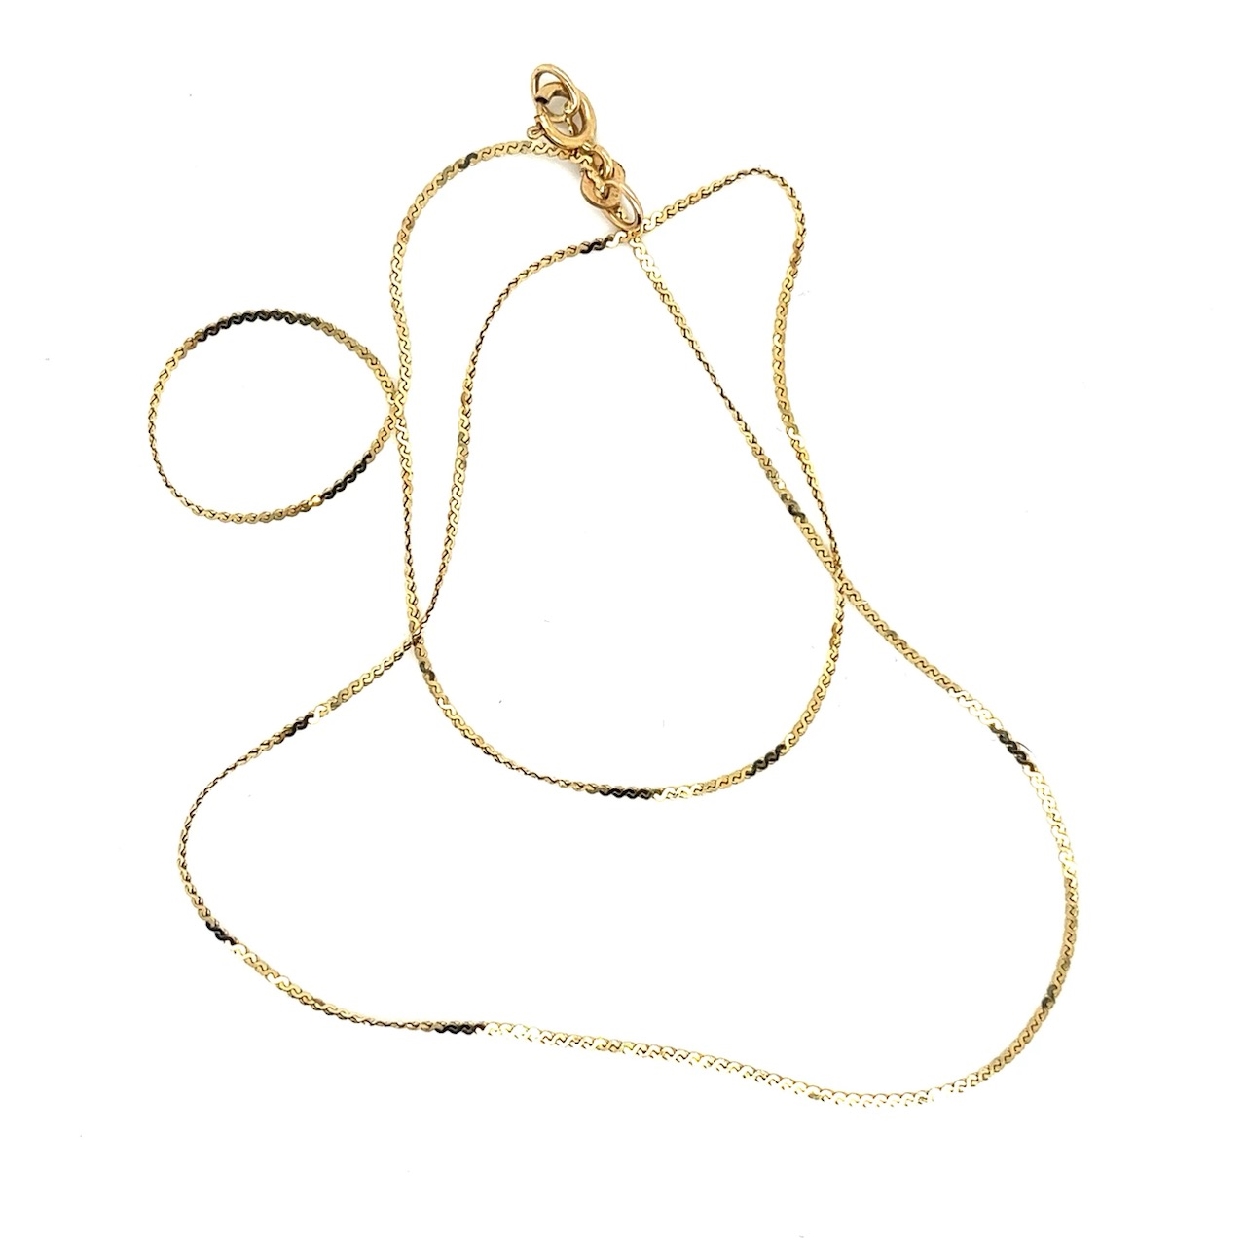 14K Yellow Gold Serpentine Chain 
15.5 Inches